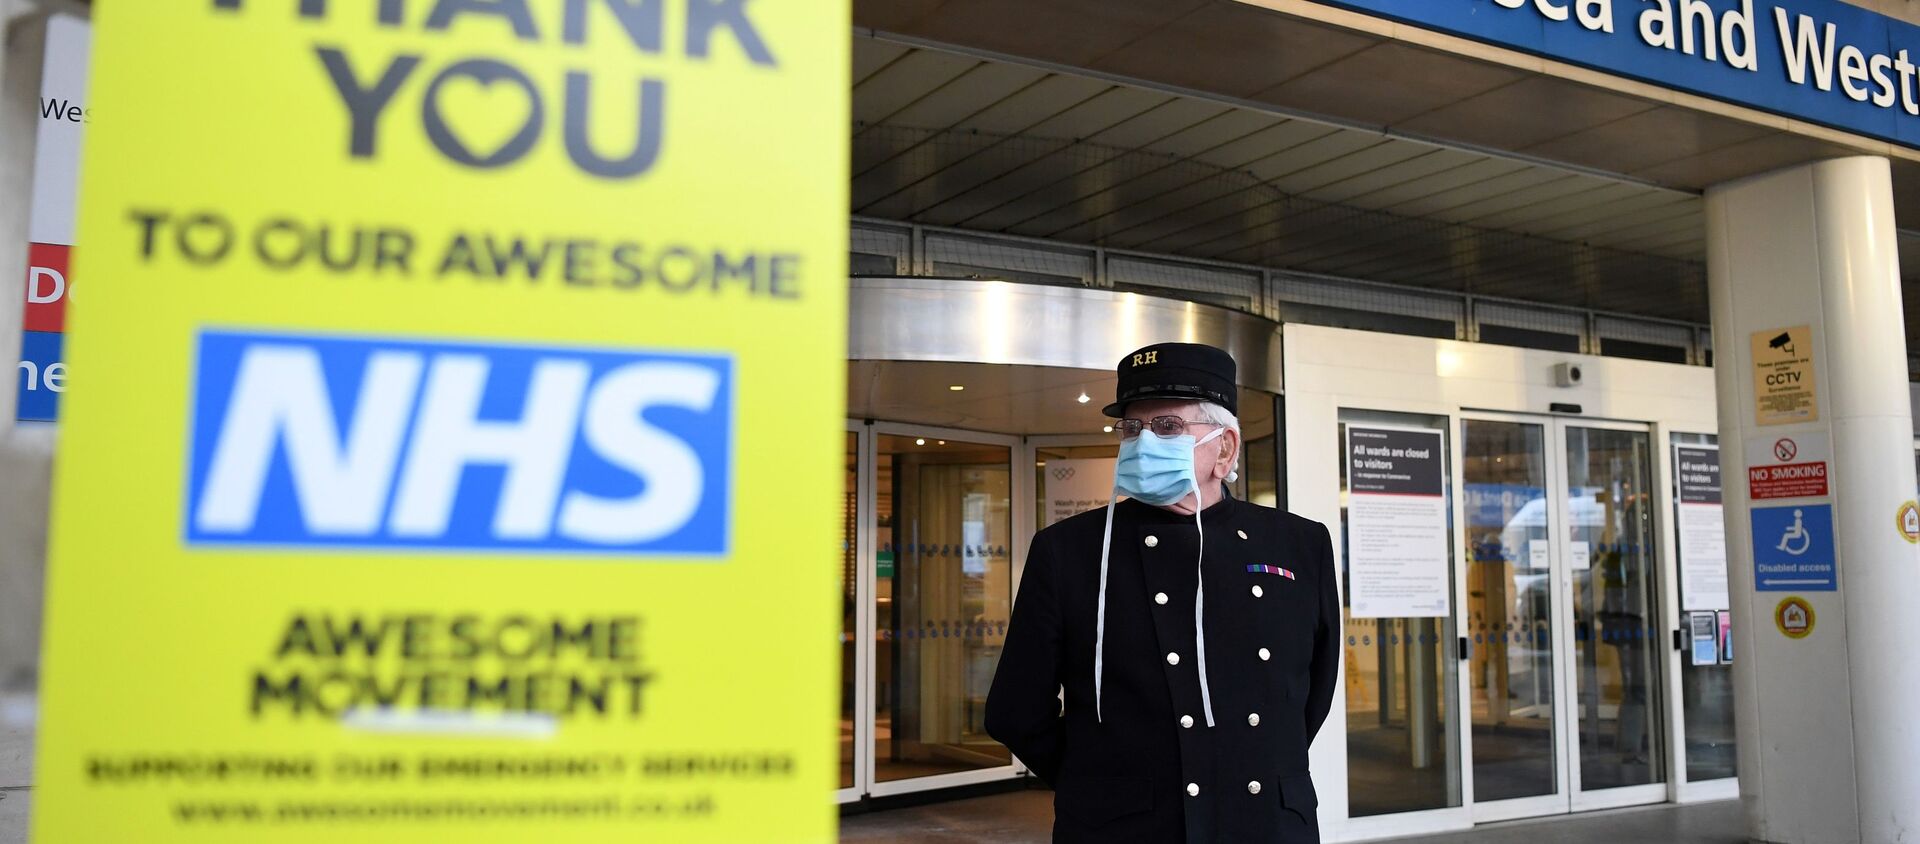 A veteran wearing a Royal Hospital Chelsea hat, and in PPE (personal protective equipment) of a face mask, as a precautionary measure against COVID-19, stands outside the Chelsea and Westminster Hospital in London on April 28, 2020, ahead of a minute's silence to honour UK key workers, including Britain's NHS (National Health Service) staff, health and social care workers, who have died during the coronavirus outbreak. - Sputnik International, 1920